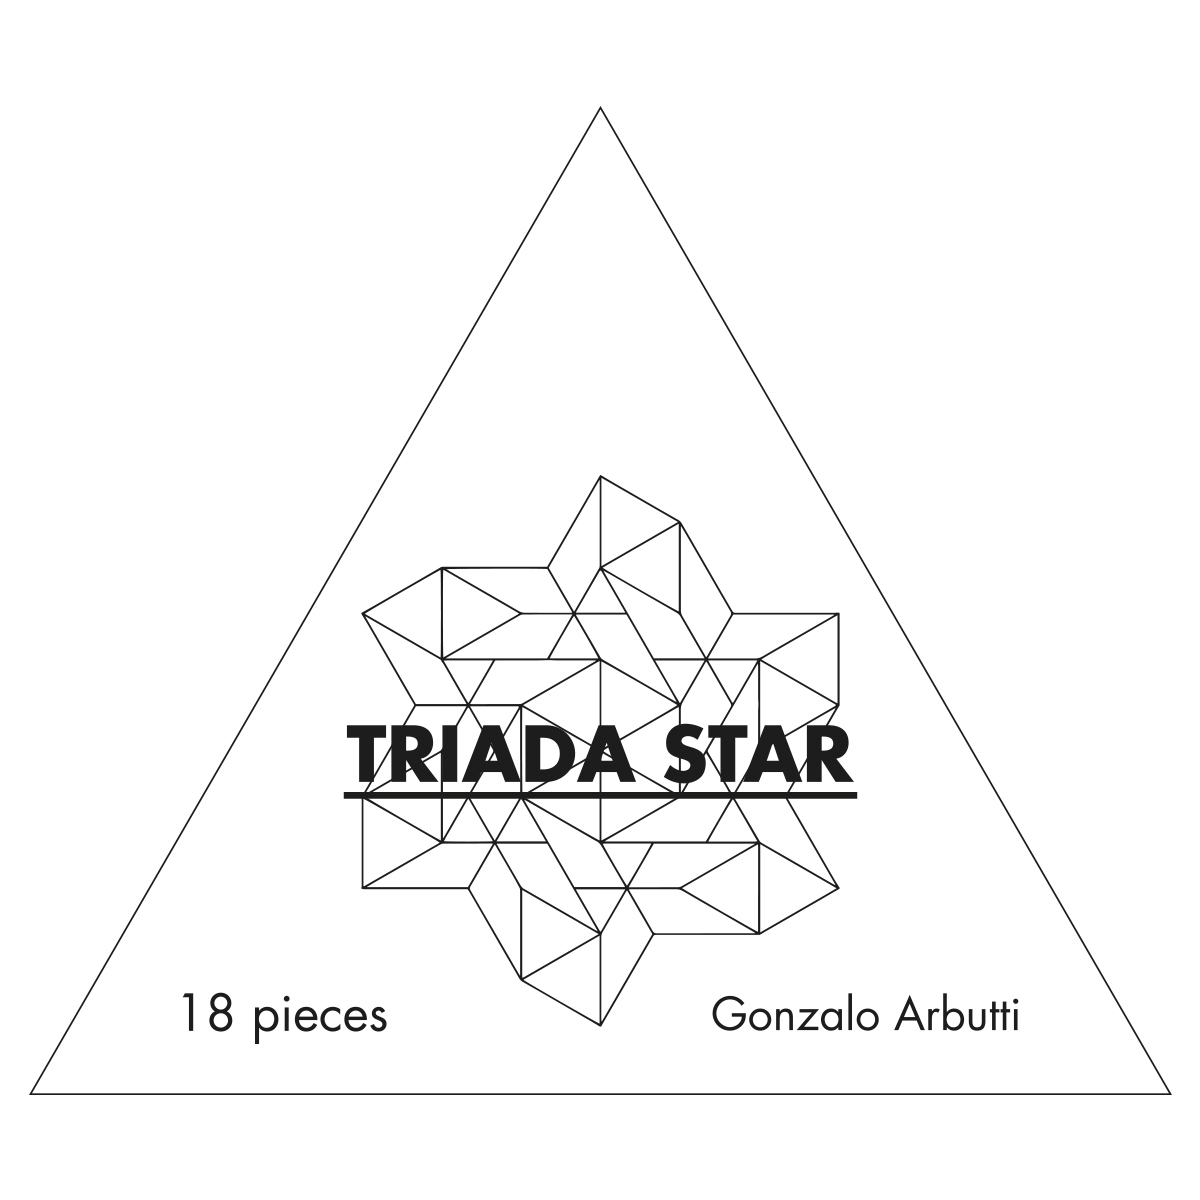 design Pack brand game Triada star industrial product graphic